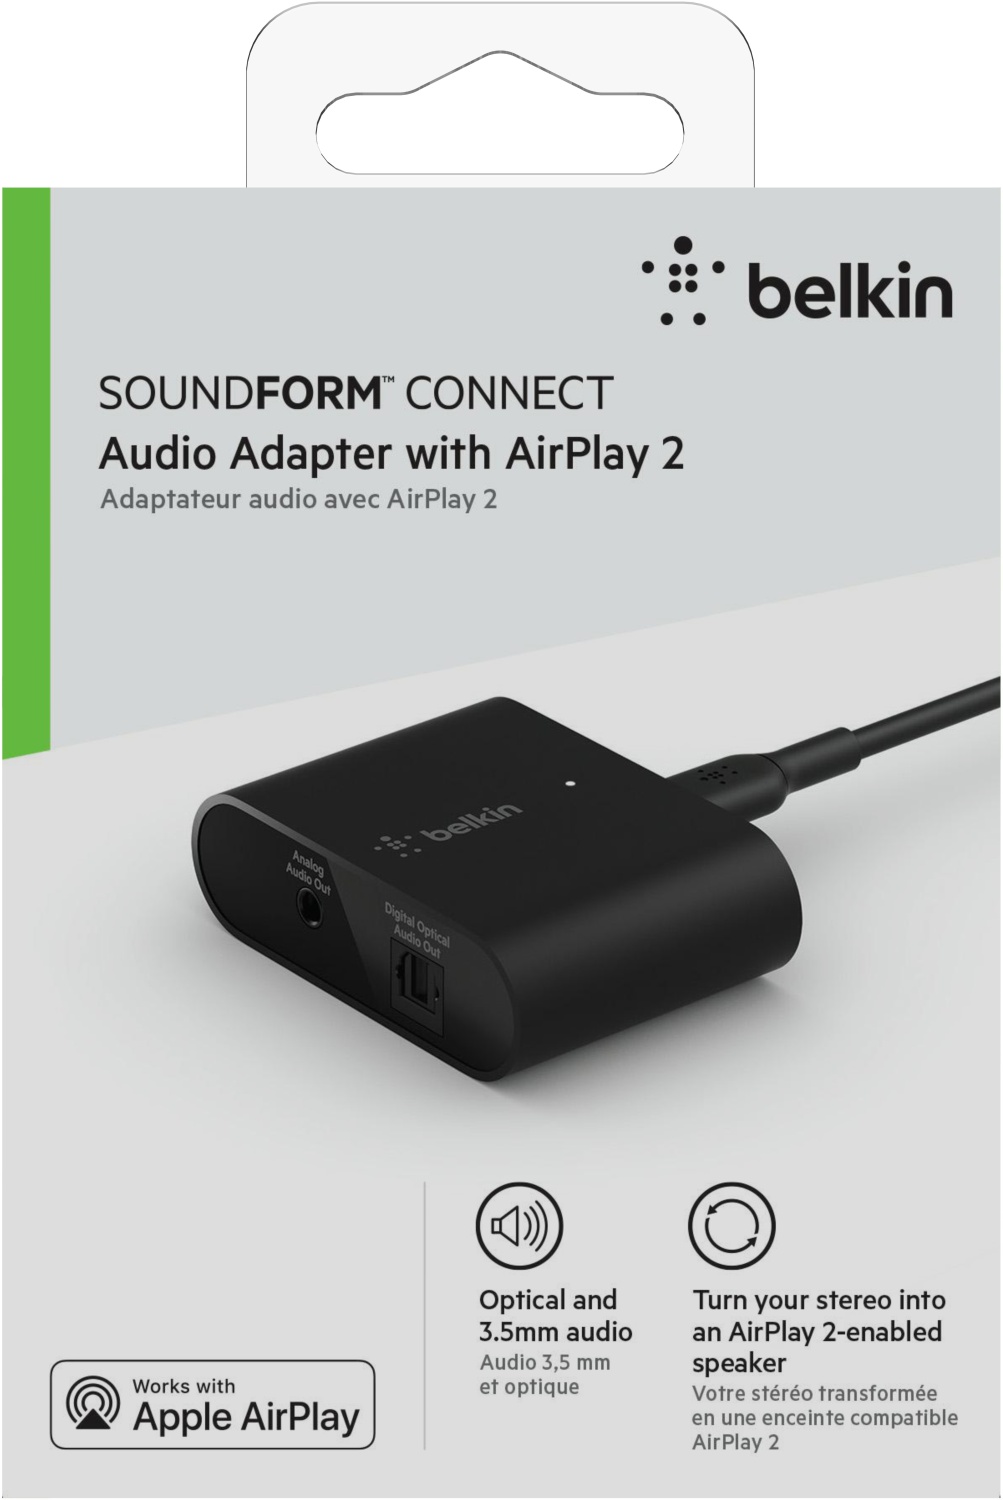 Belkin SOUNDFORM Connect Audio Adapter with AirPlay 2 - Thali